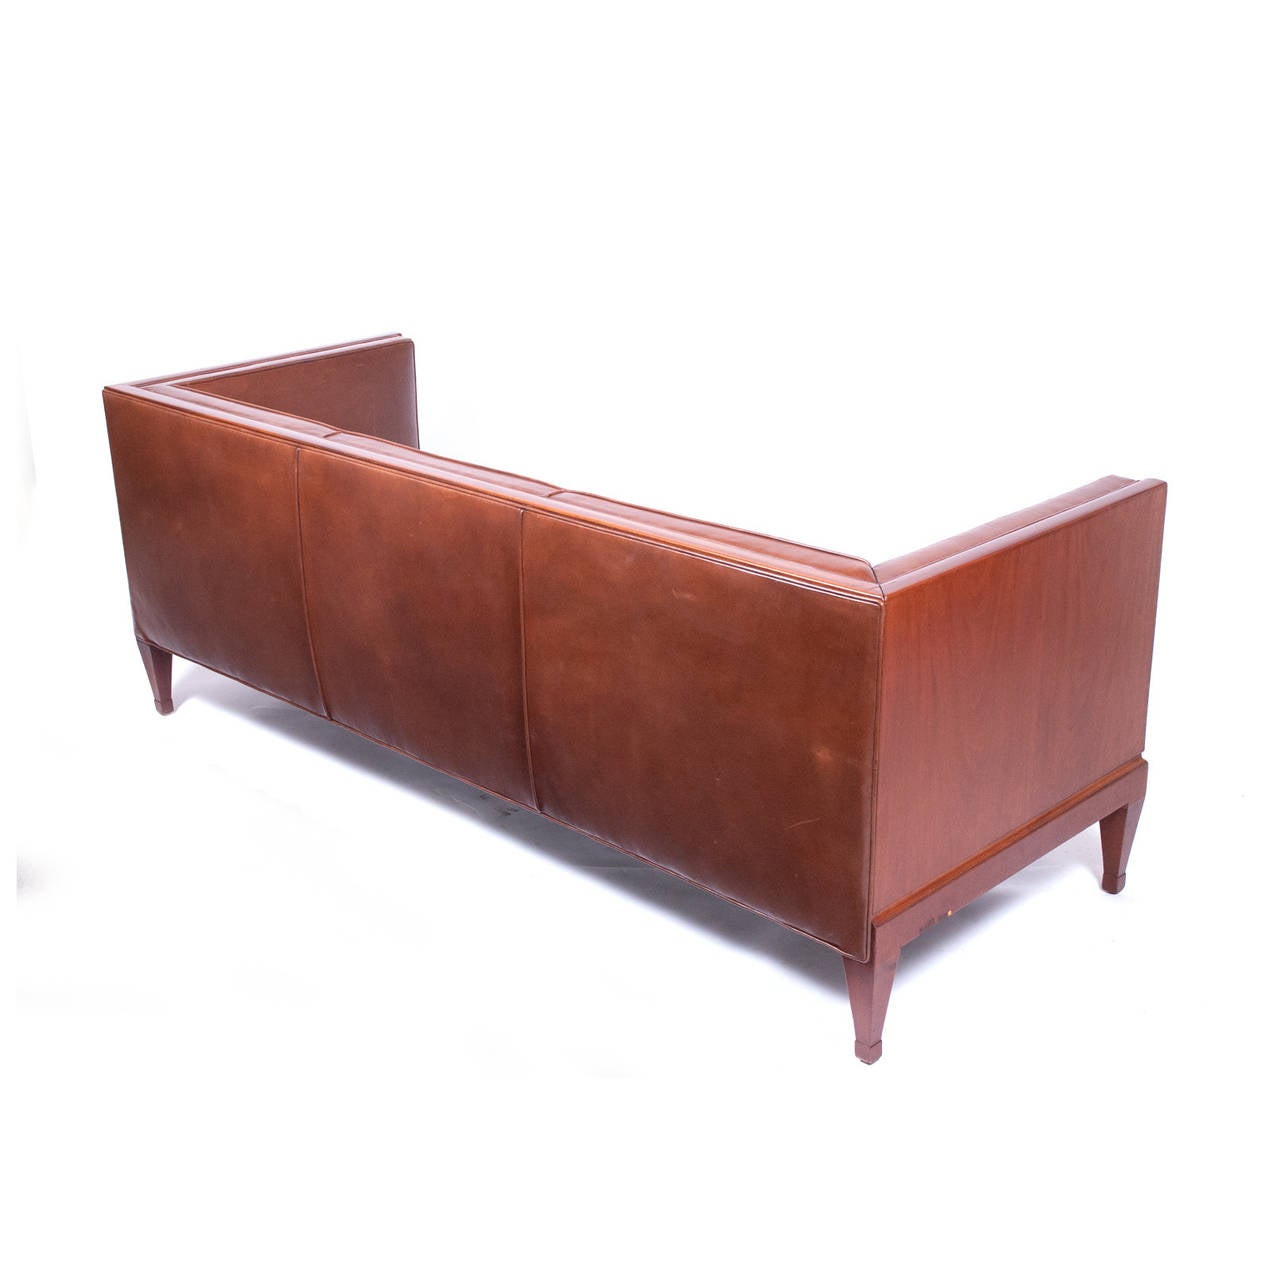 Rare mahogany sofa design and manufacture by Frits Henningsen in 1930s, newer leather upholstery custom upholstery in the back of the sofa.